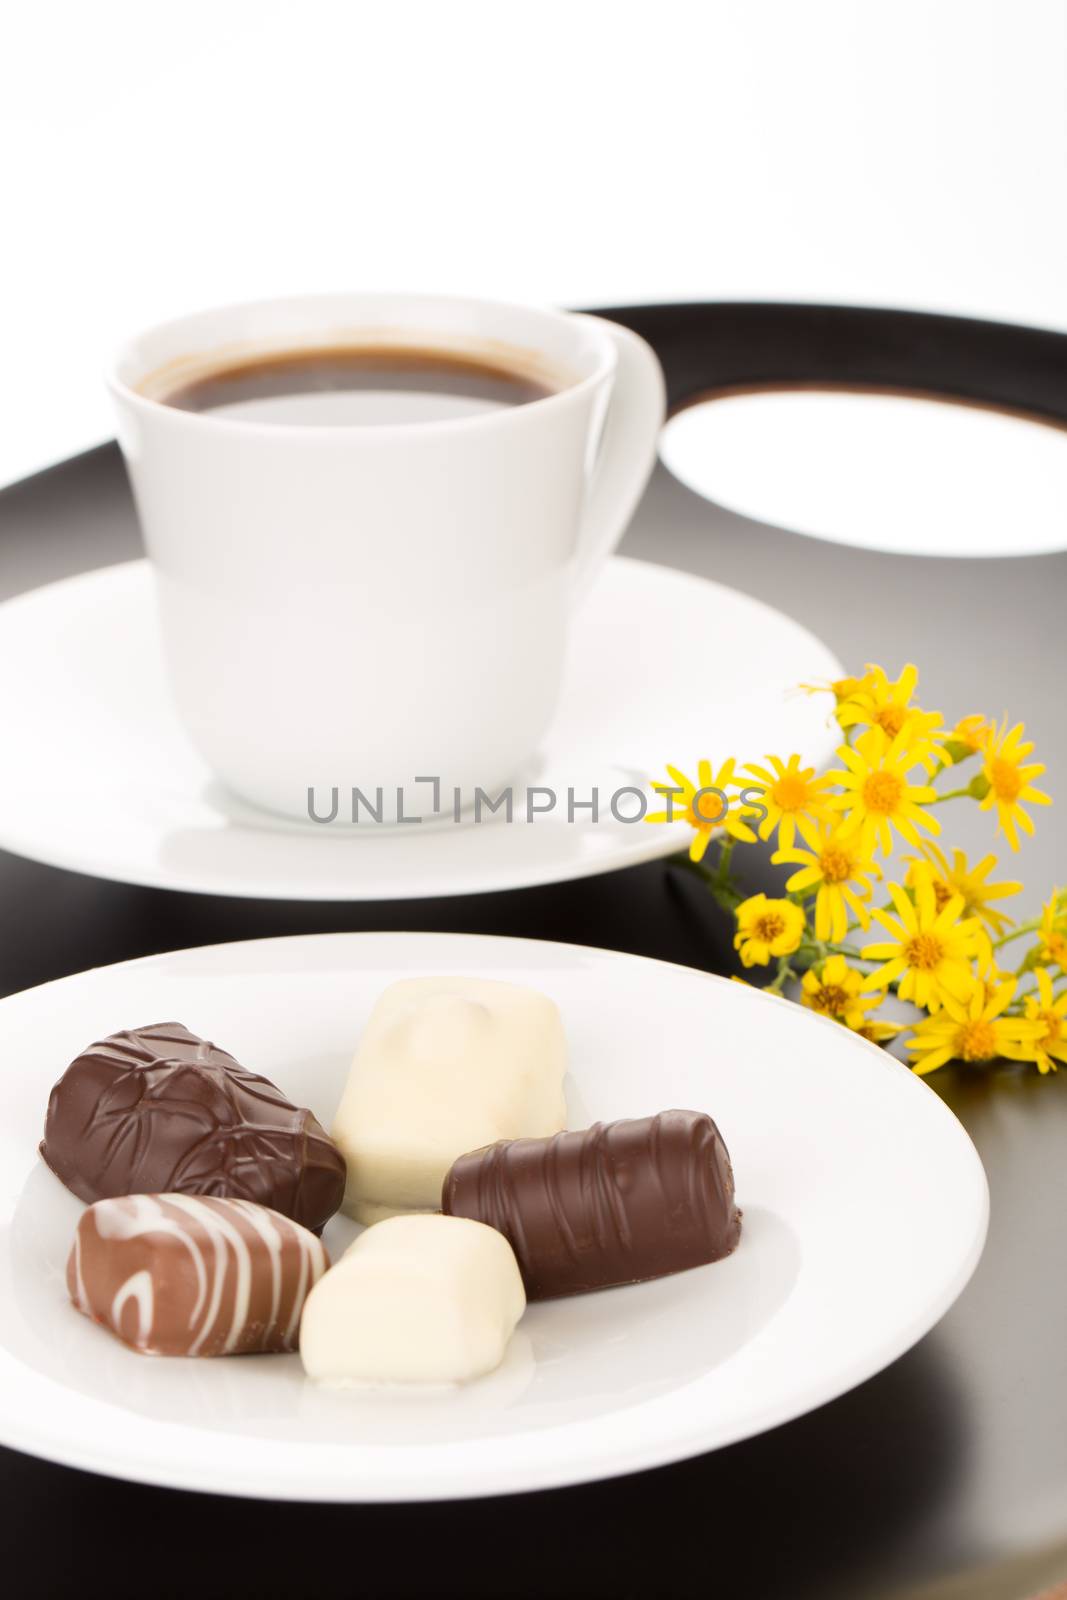 Chocolate and coffee by lusjen_n